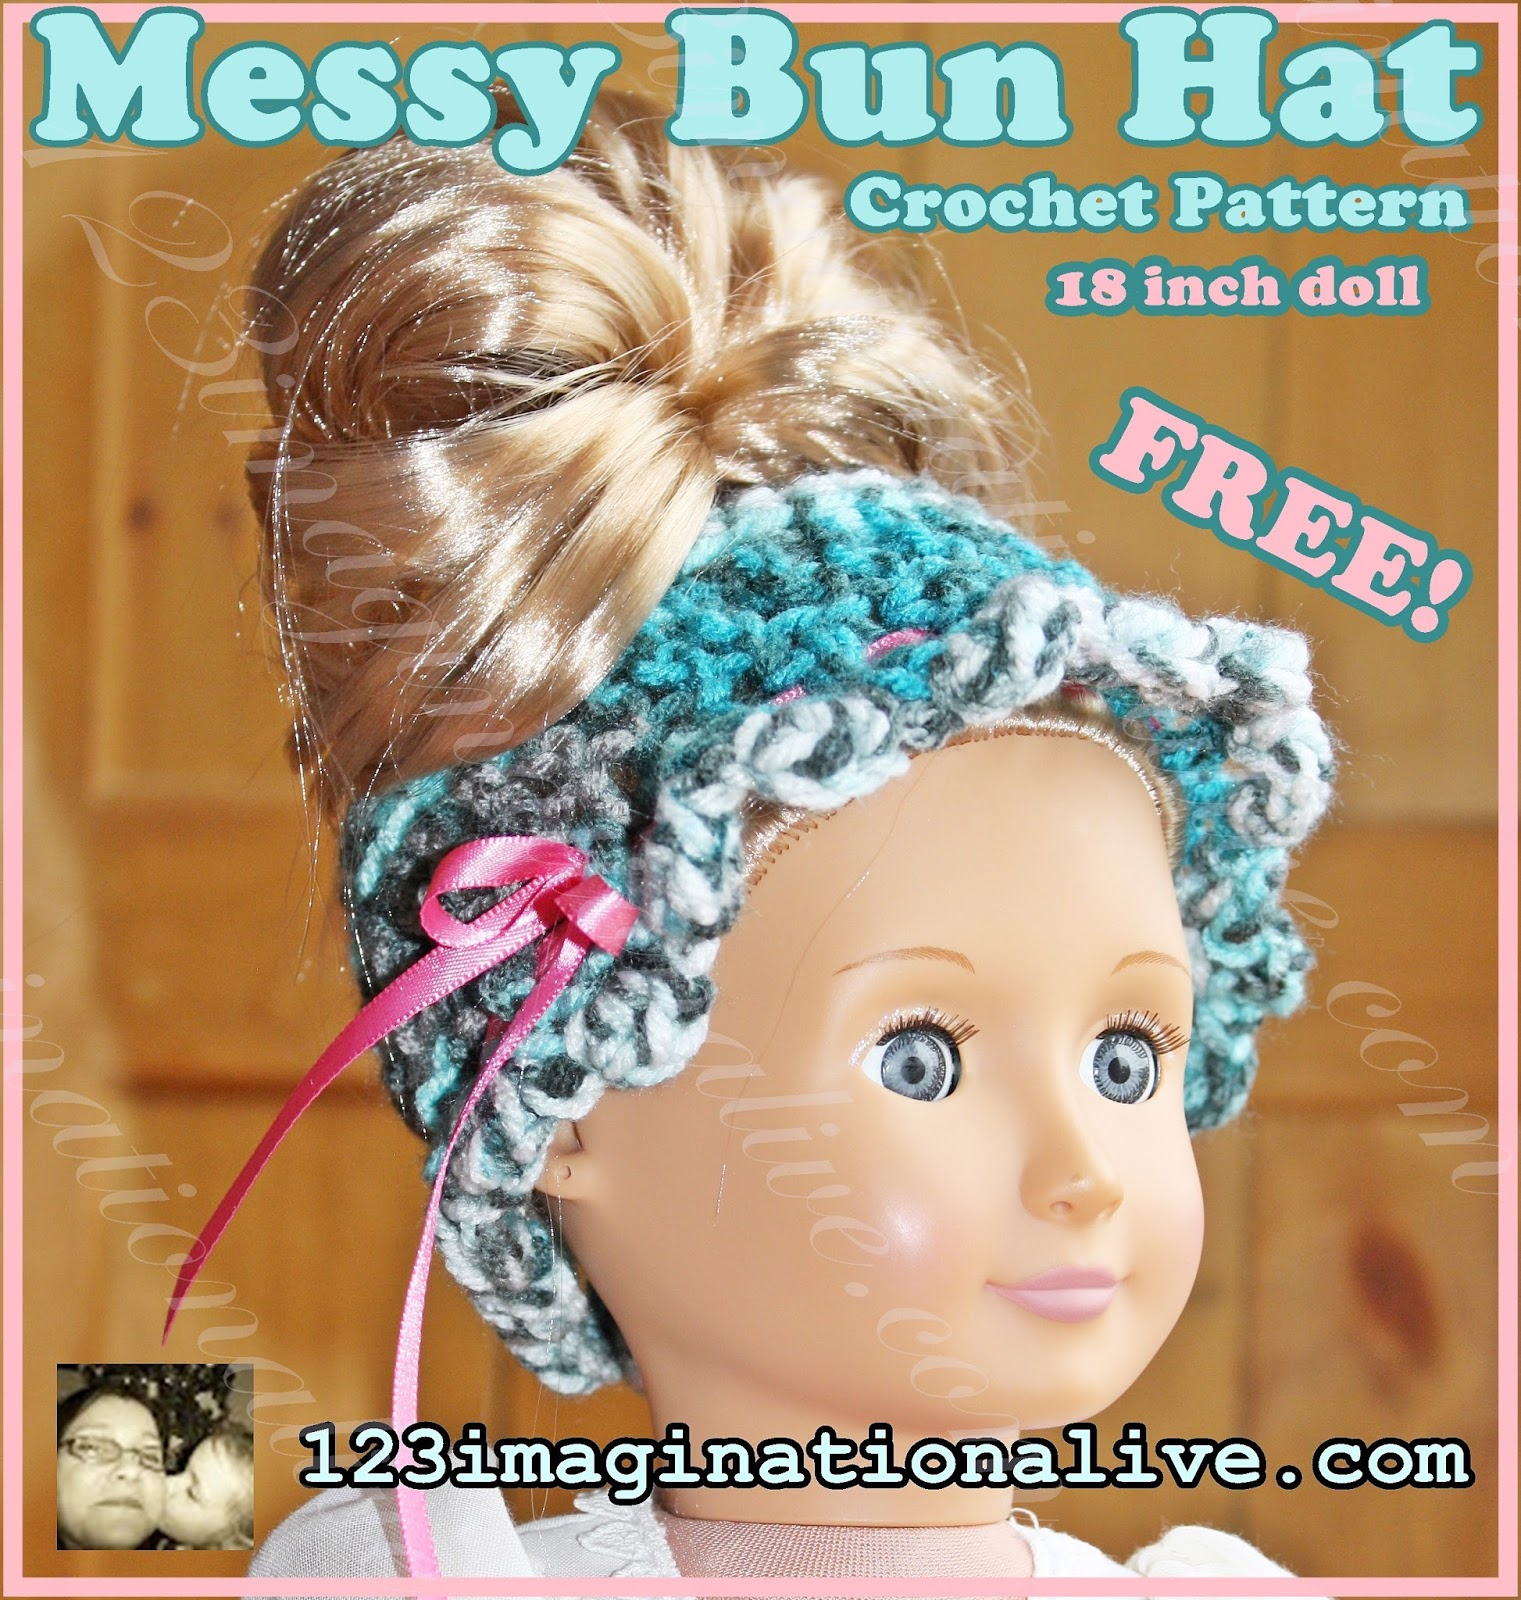 Free Crochet Patterns For American Girl Doll 123imaginationalive Messy Bun Crochet Hat Pattern Will Fit